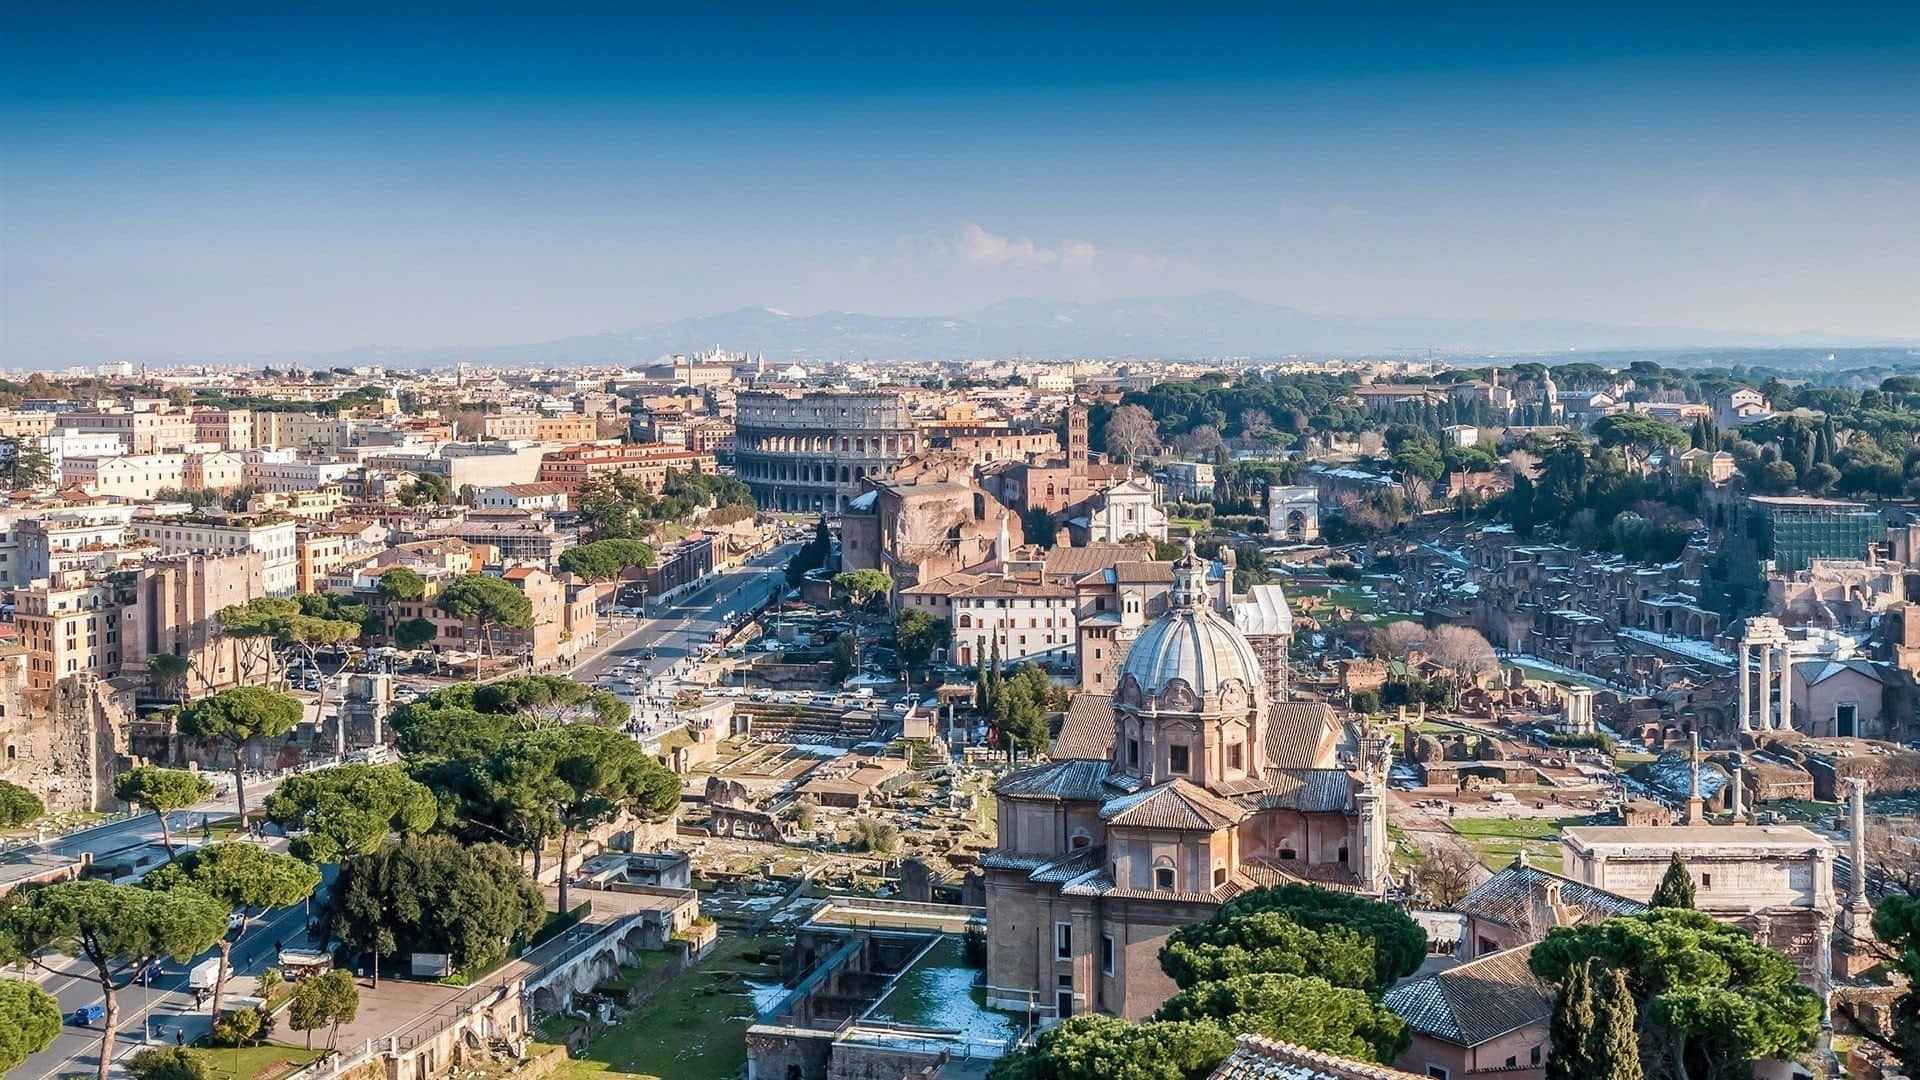 "The Eternal City of Rome"